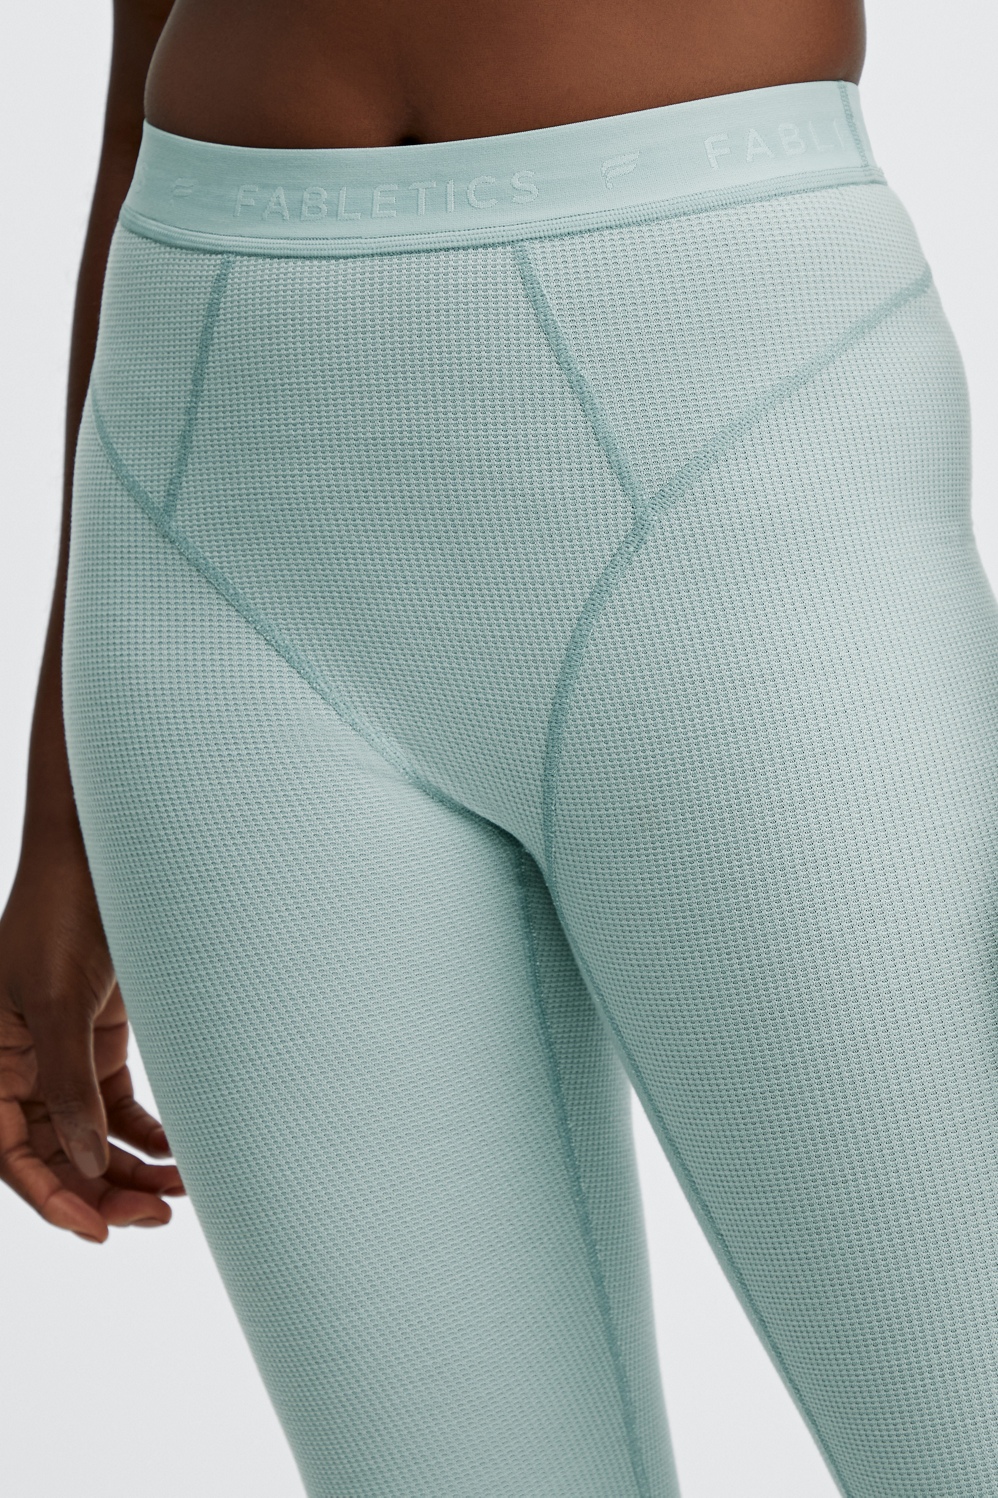 Fabletics Waffle High-Waisted Legging - Fabletics